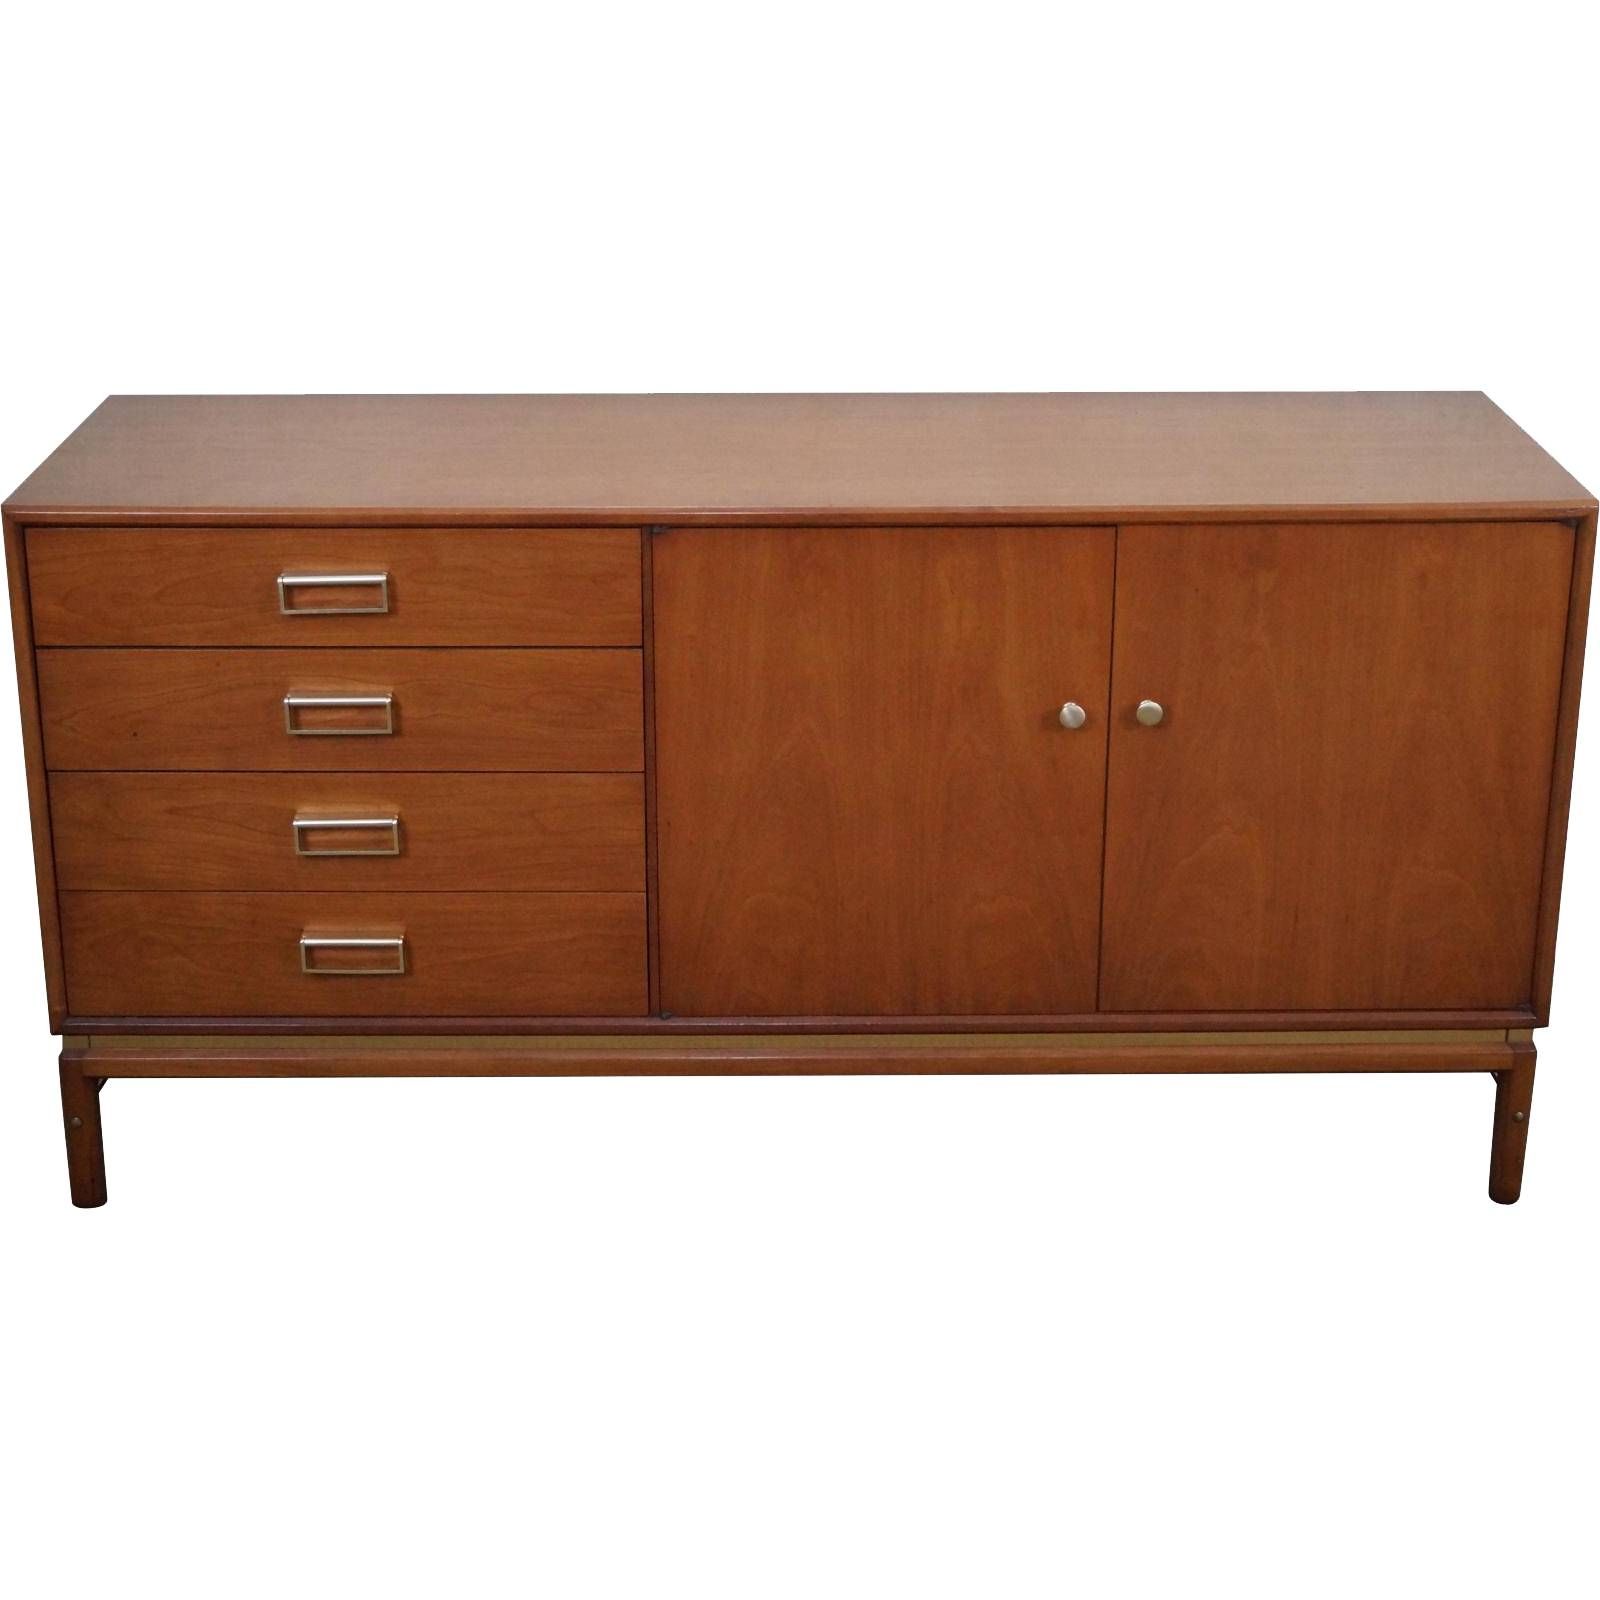 Drexel Suncoast Kipp Stewart Mid Century Modern Sideboard From Throughout Most Current Mid Century Modern Sideboards (View 6 of 15)